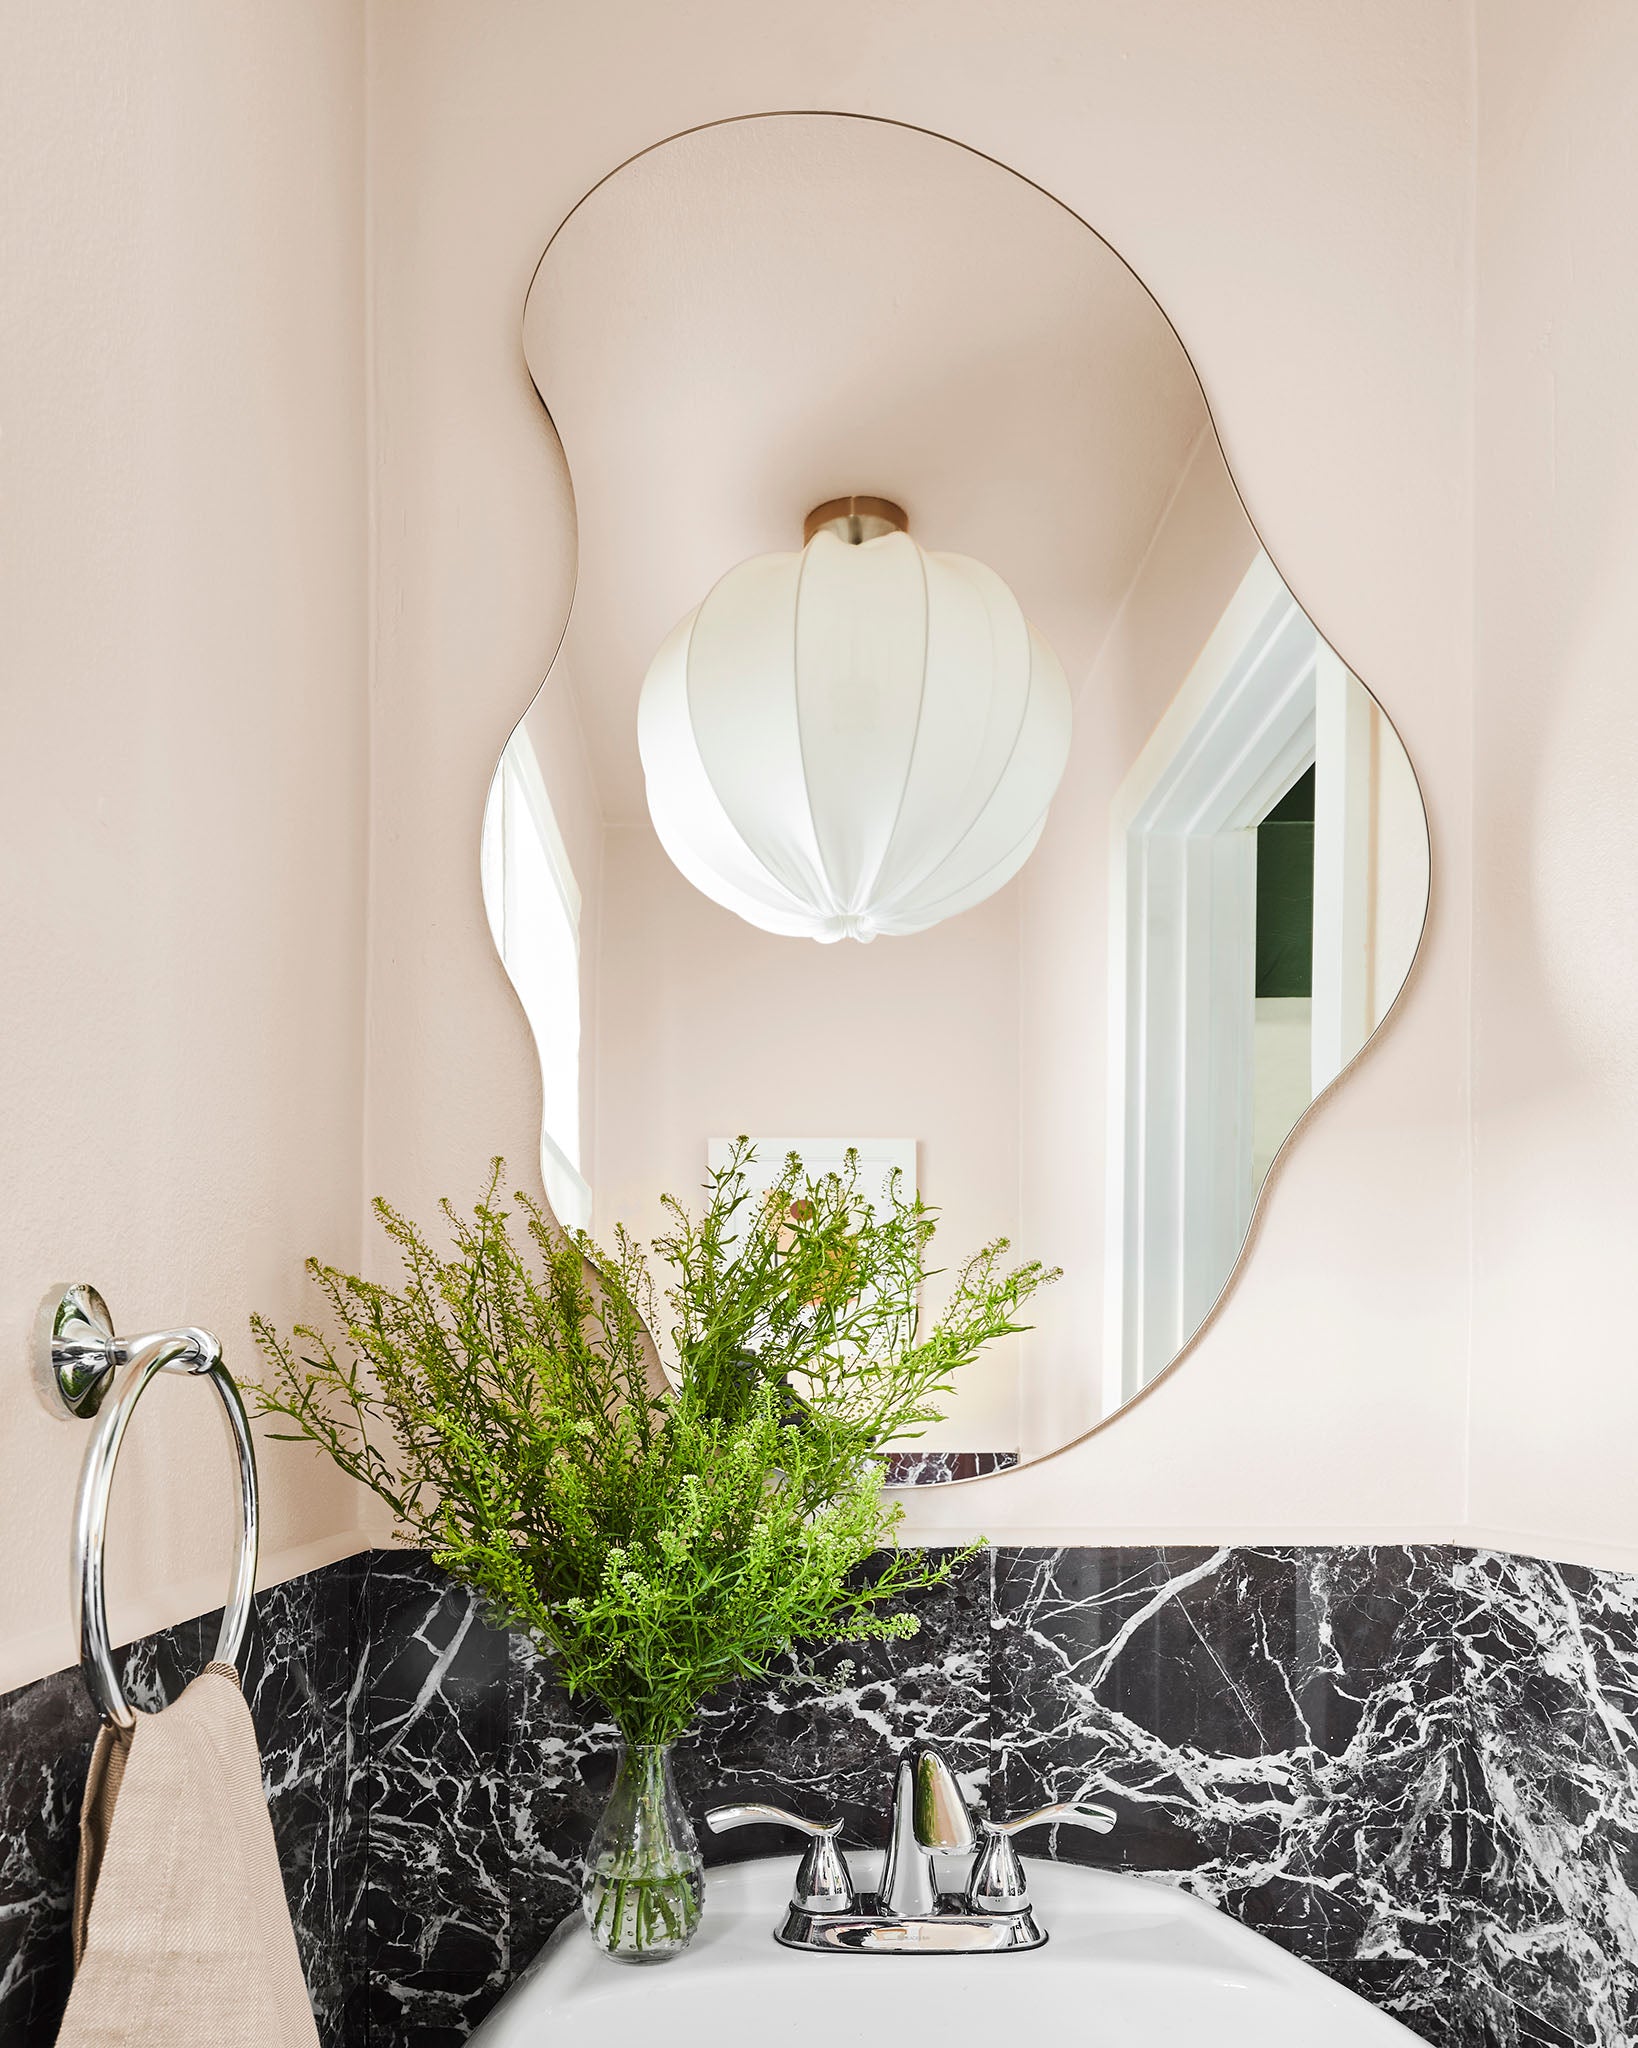 An asymmetrical mirror and oversized light fixture are great ideas for a powder room.